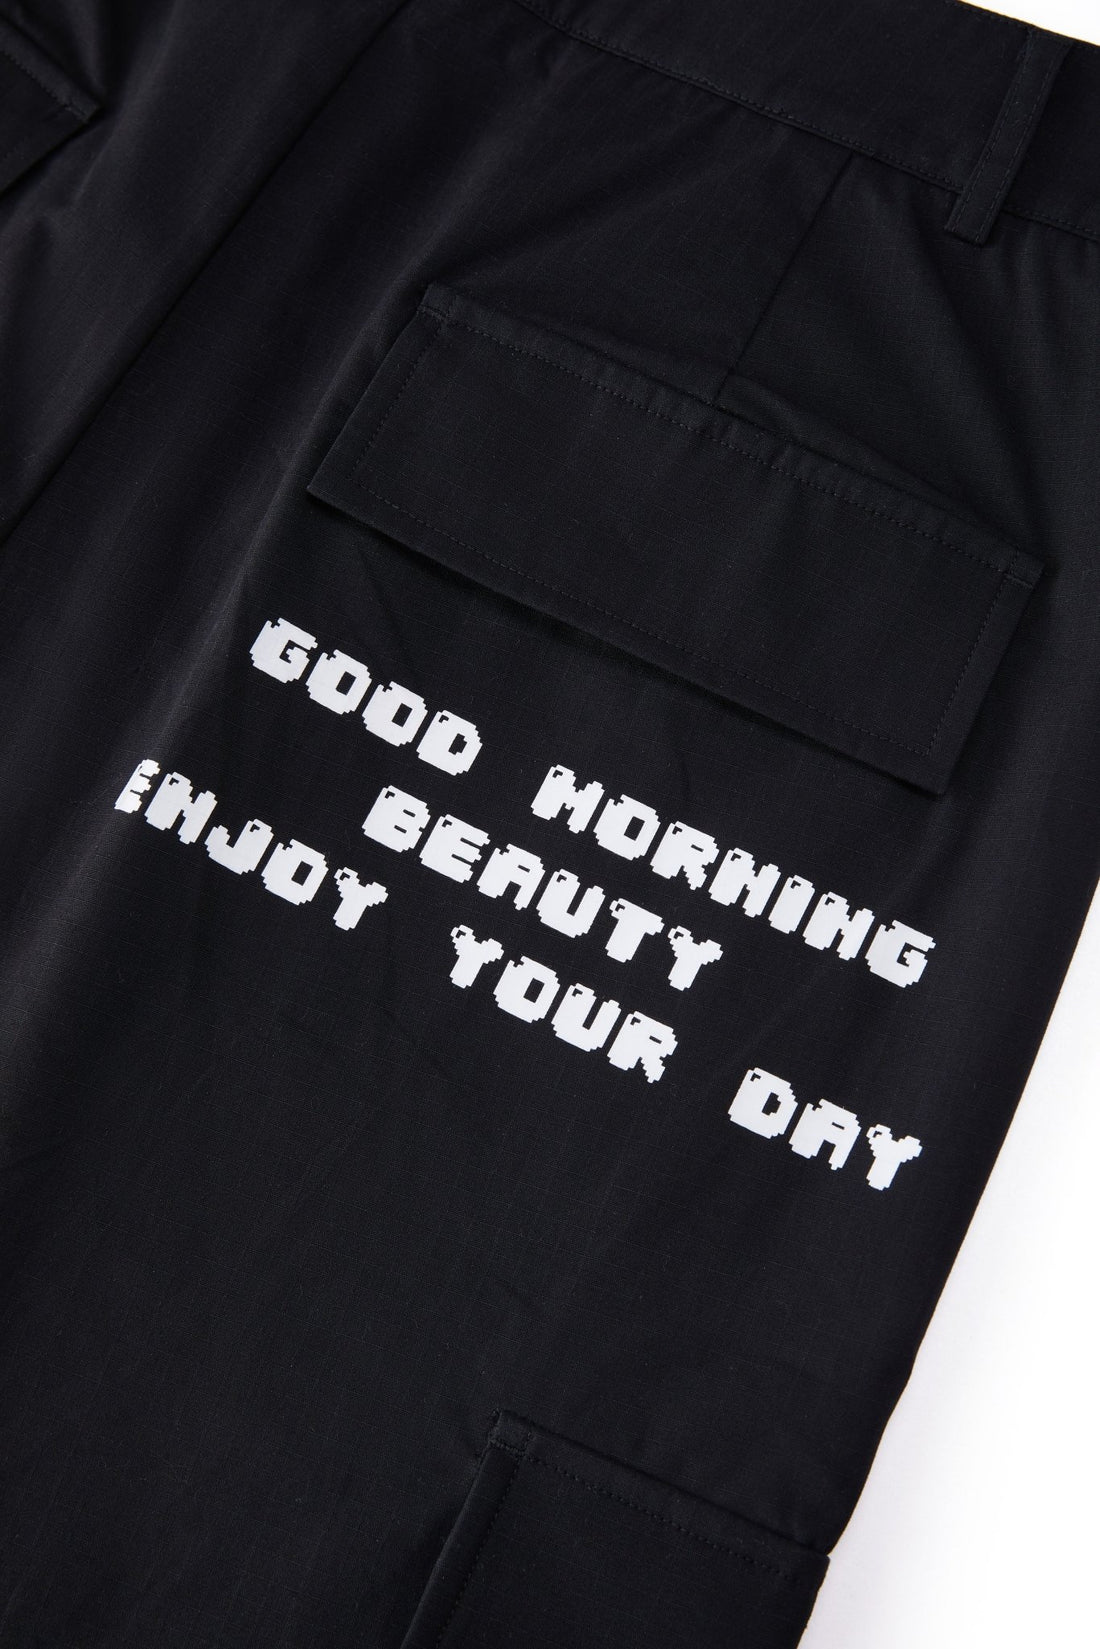 GOOD MORNING BEAUTY SHORTS BLACK Acupuncture